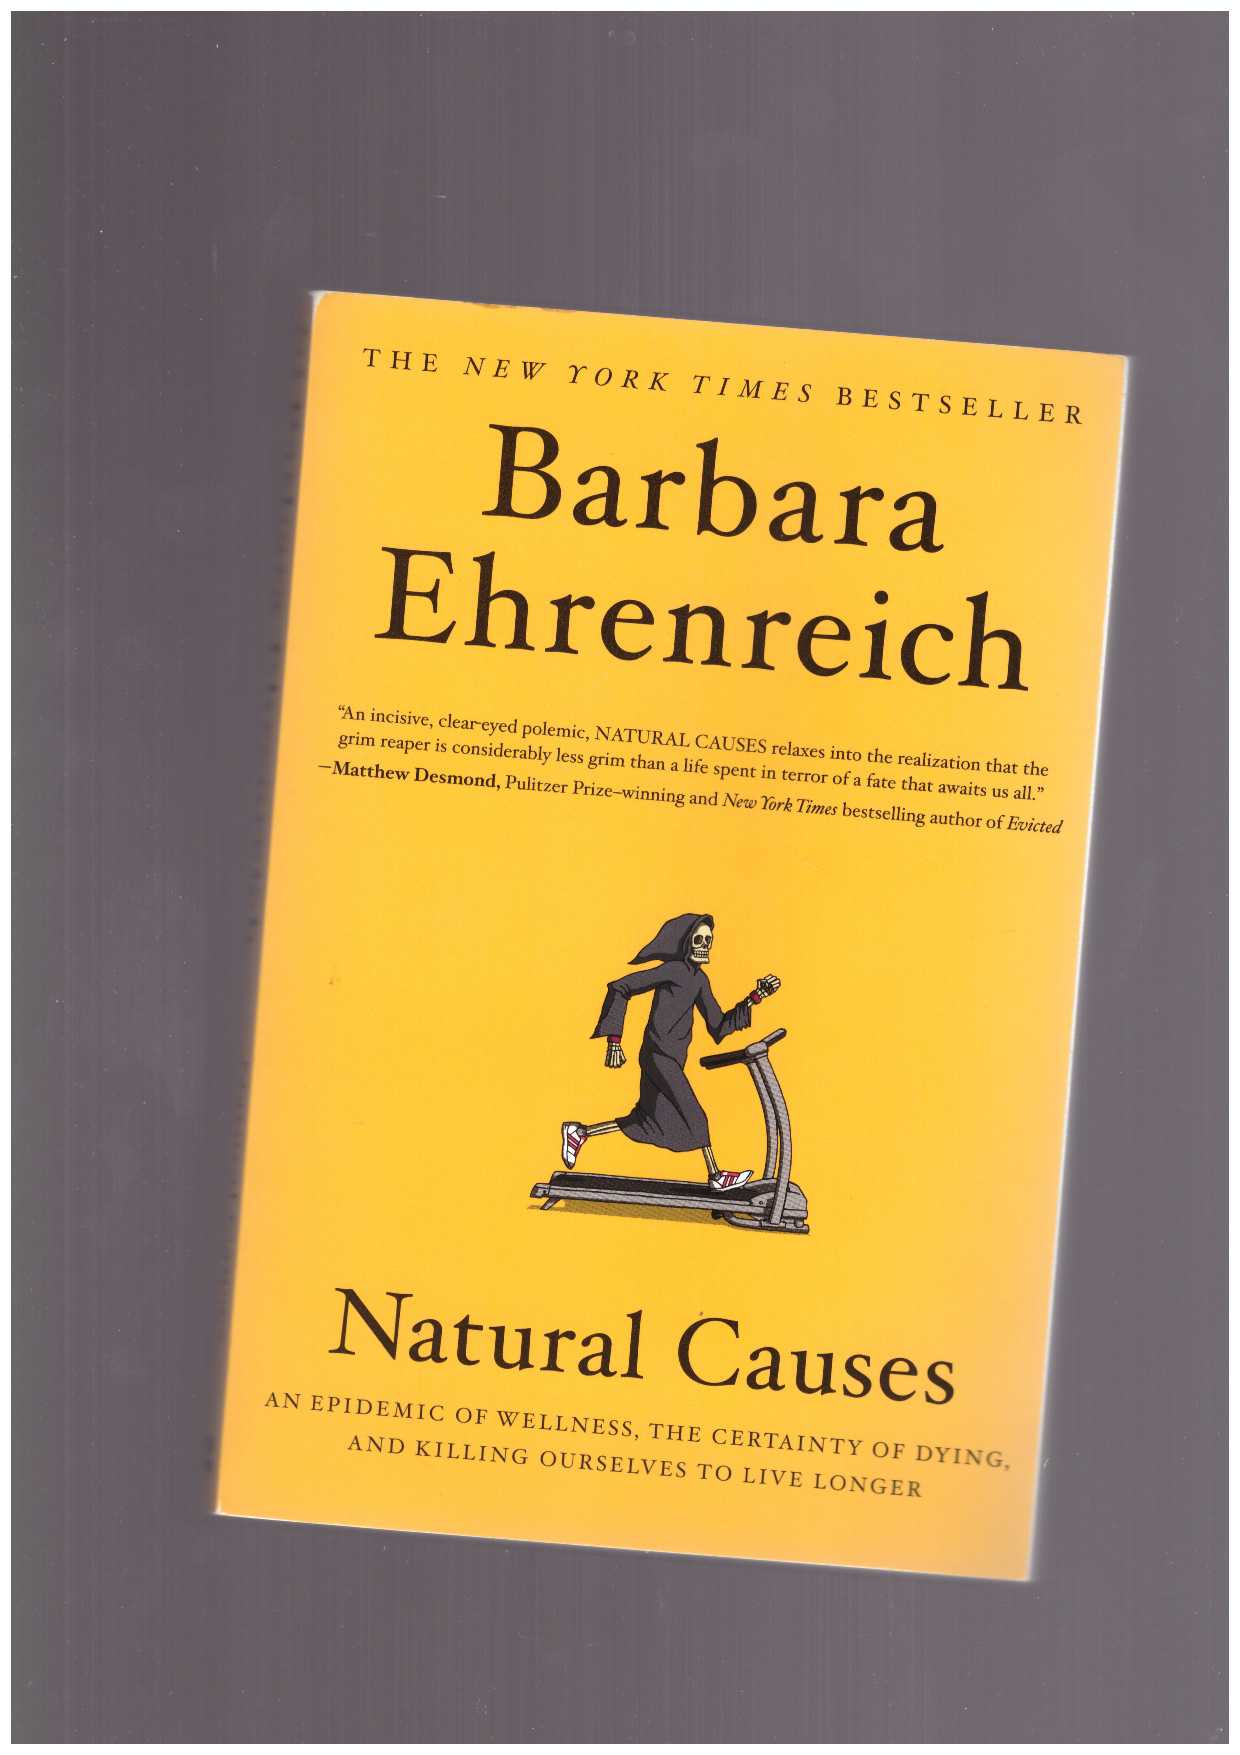 EHRENREICH, Barbara - Natural Causes. An Epidemic of Wellness, the Certainty of Dying, and Killing Ourselves to Live Longer